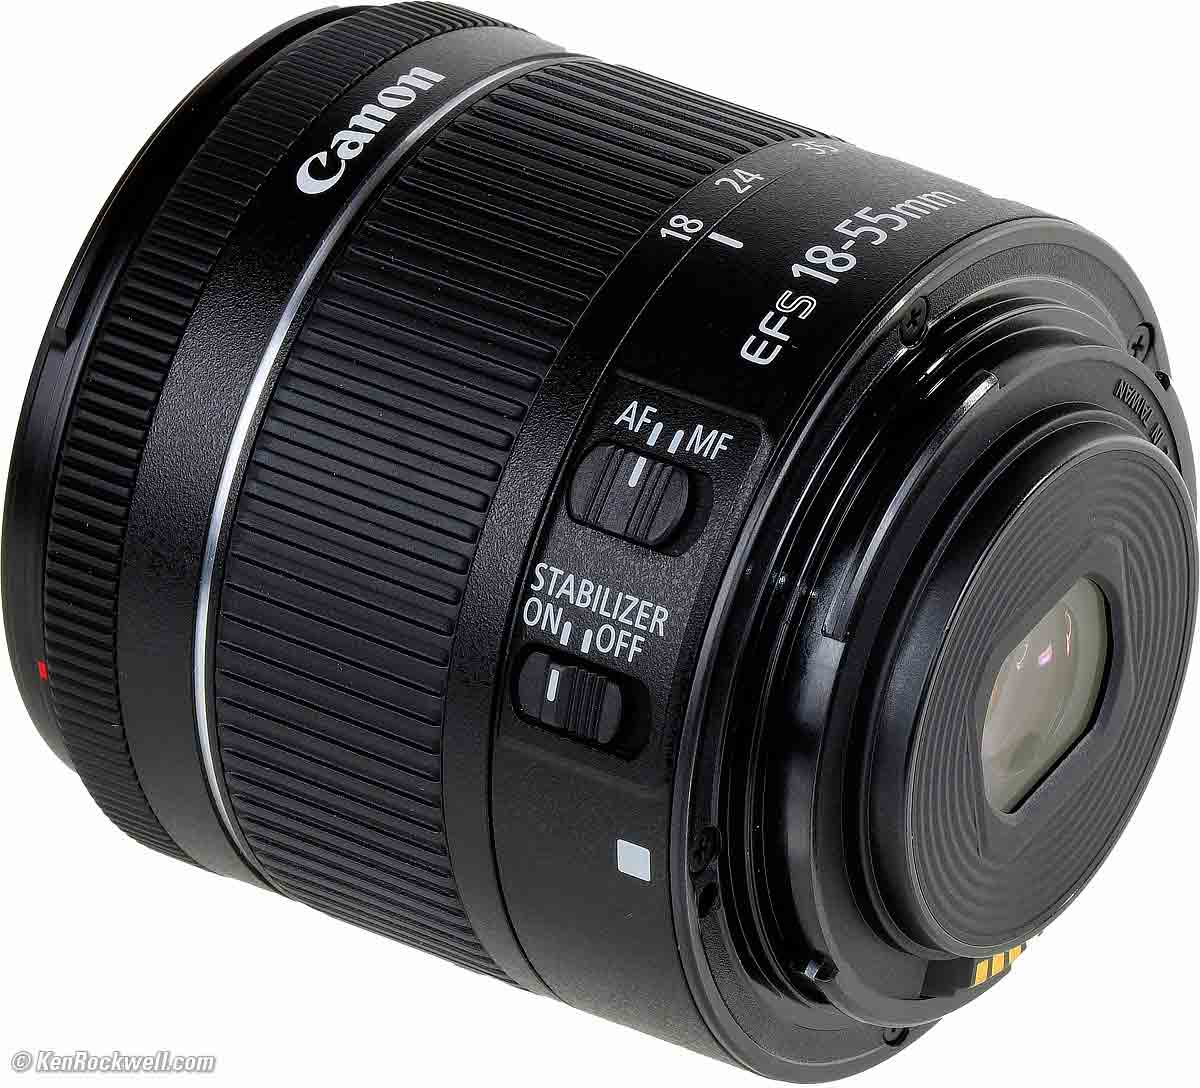 Canon 18-55mm f/4-5.6 STM Review